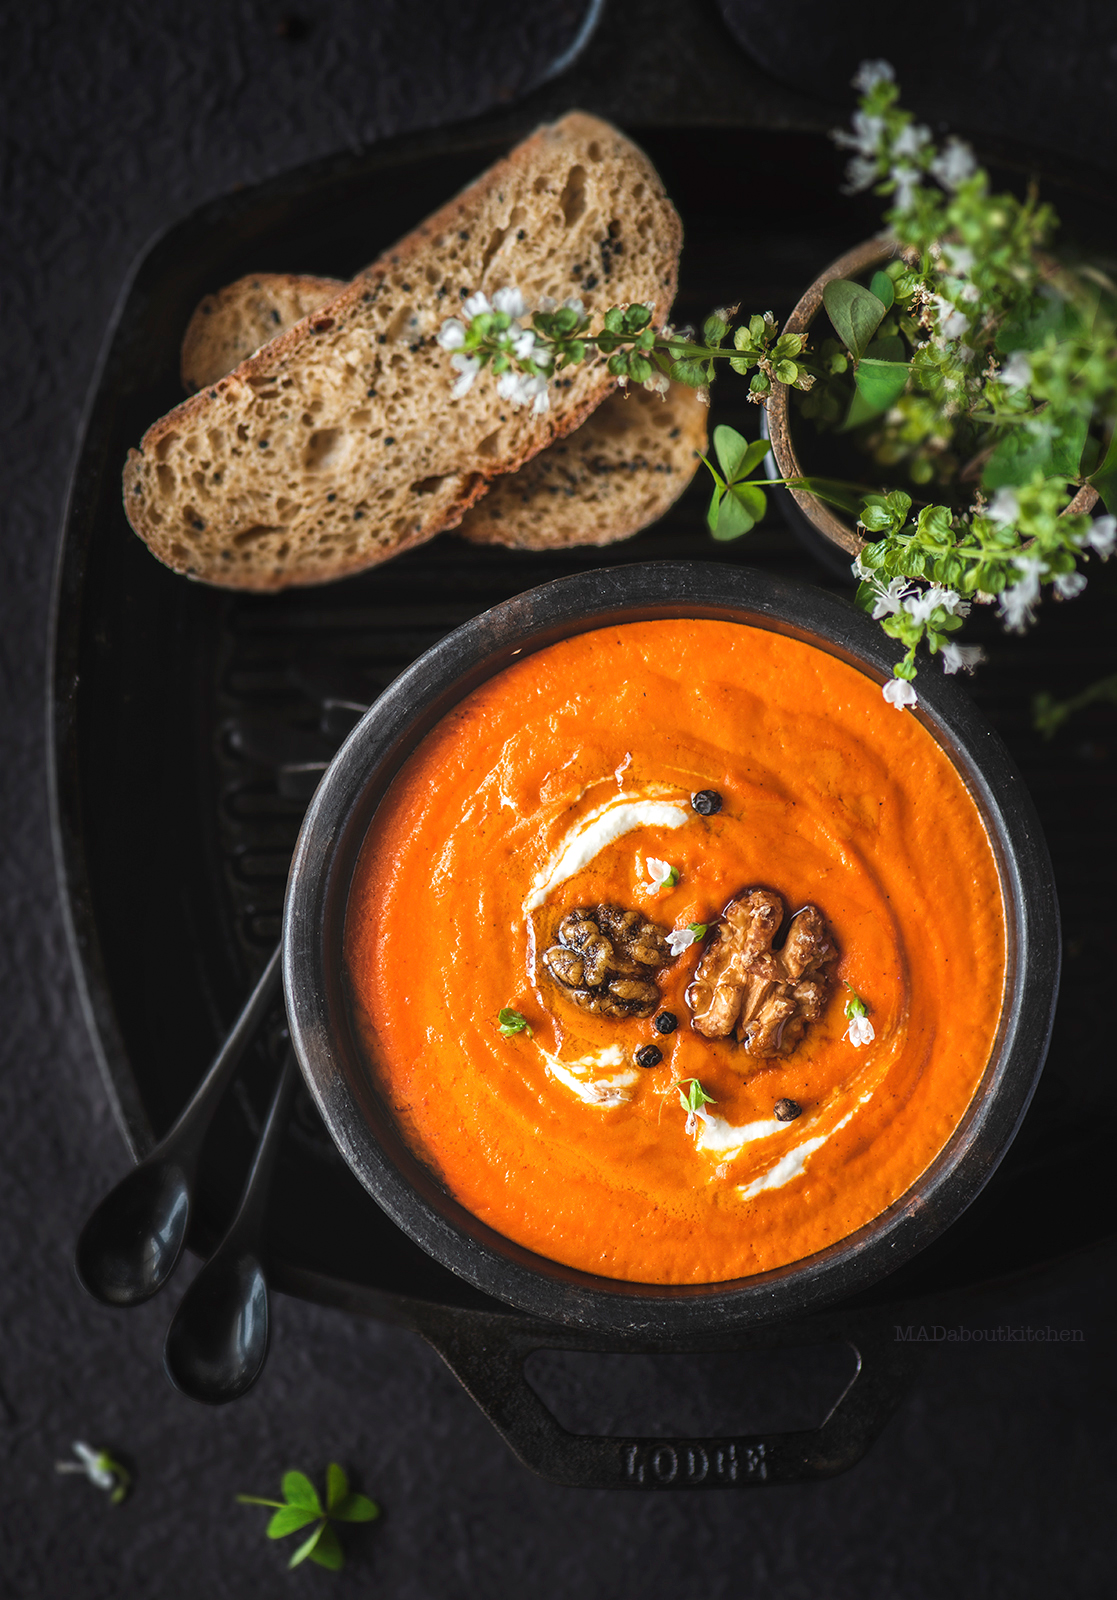 Roasted bell pepper soup made using roasted red pepper has an intense smoky flavour and is creamy and absolutely flavourful.